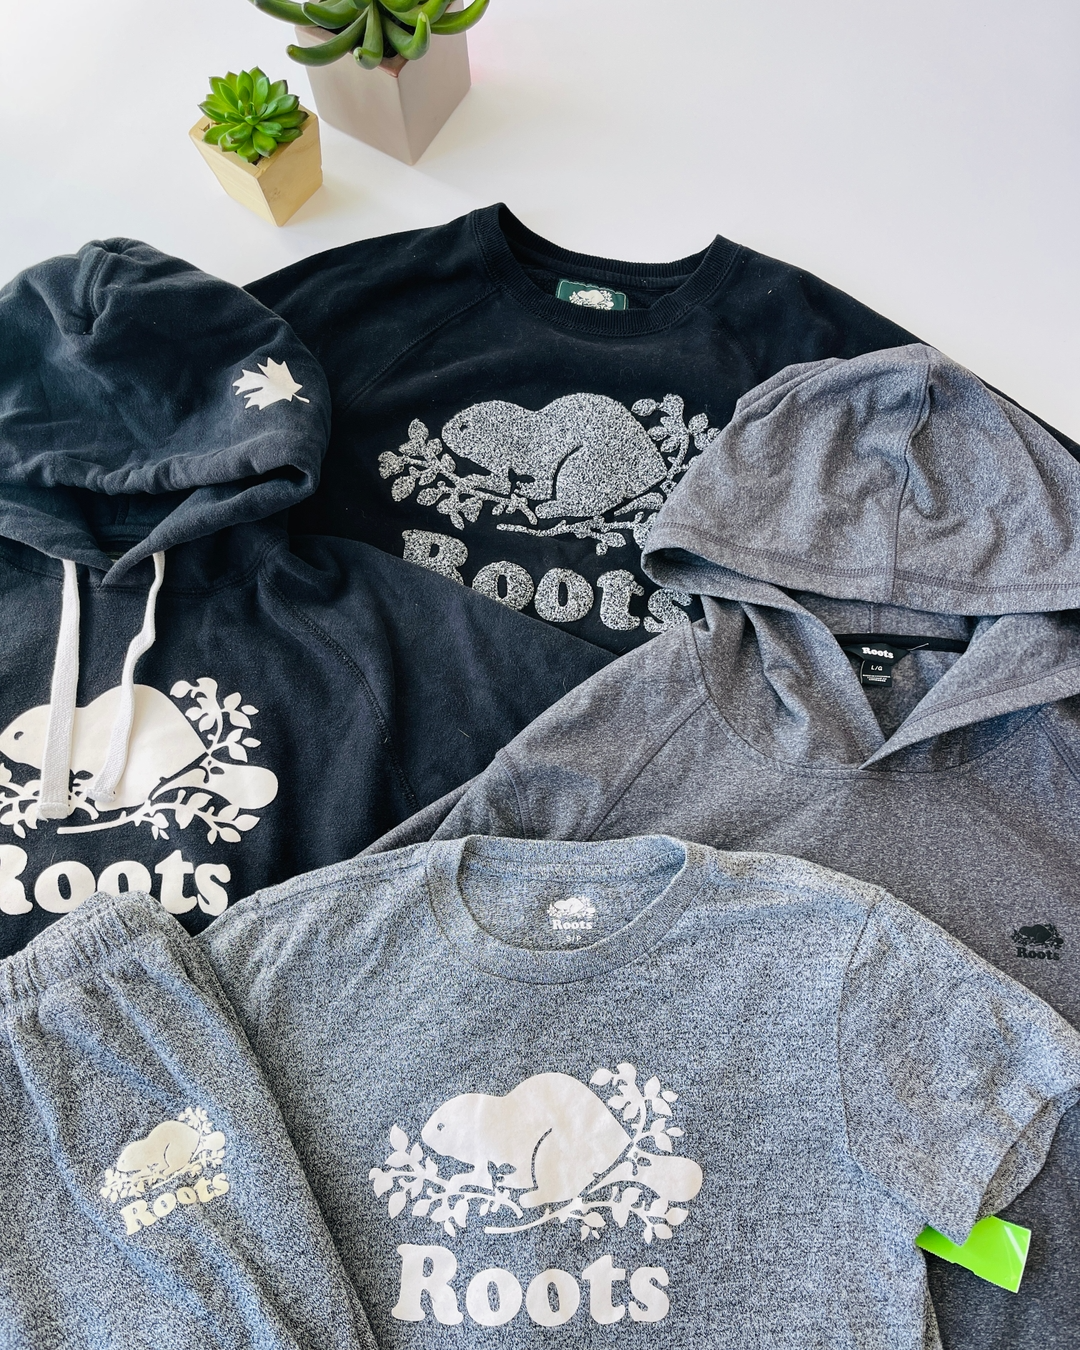 Roots brand sweatshirts and sweatpants laid out, main colours are grey.